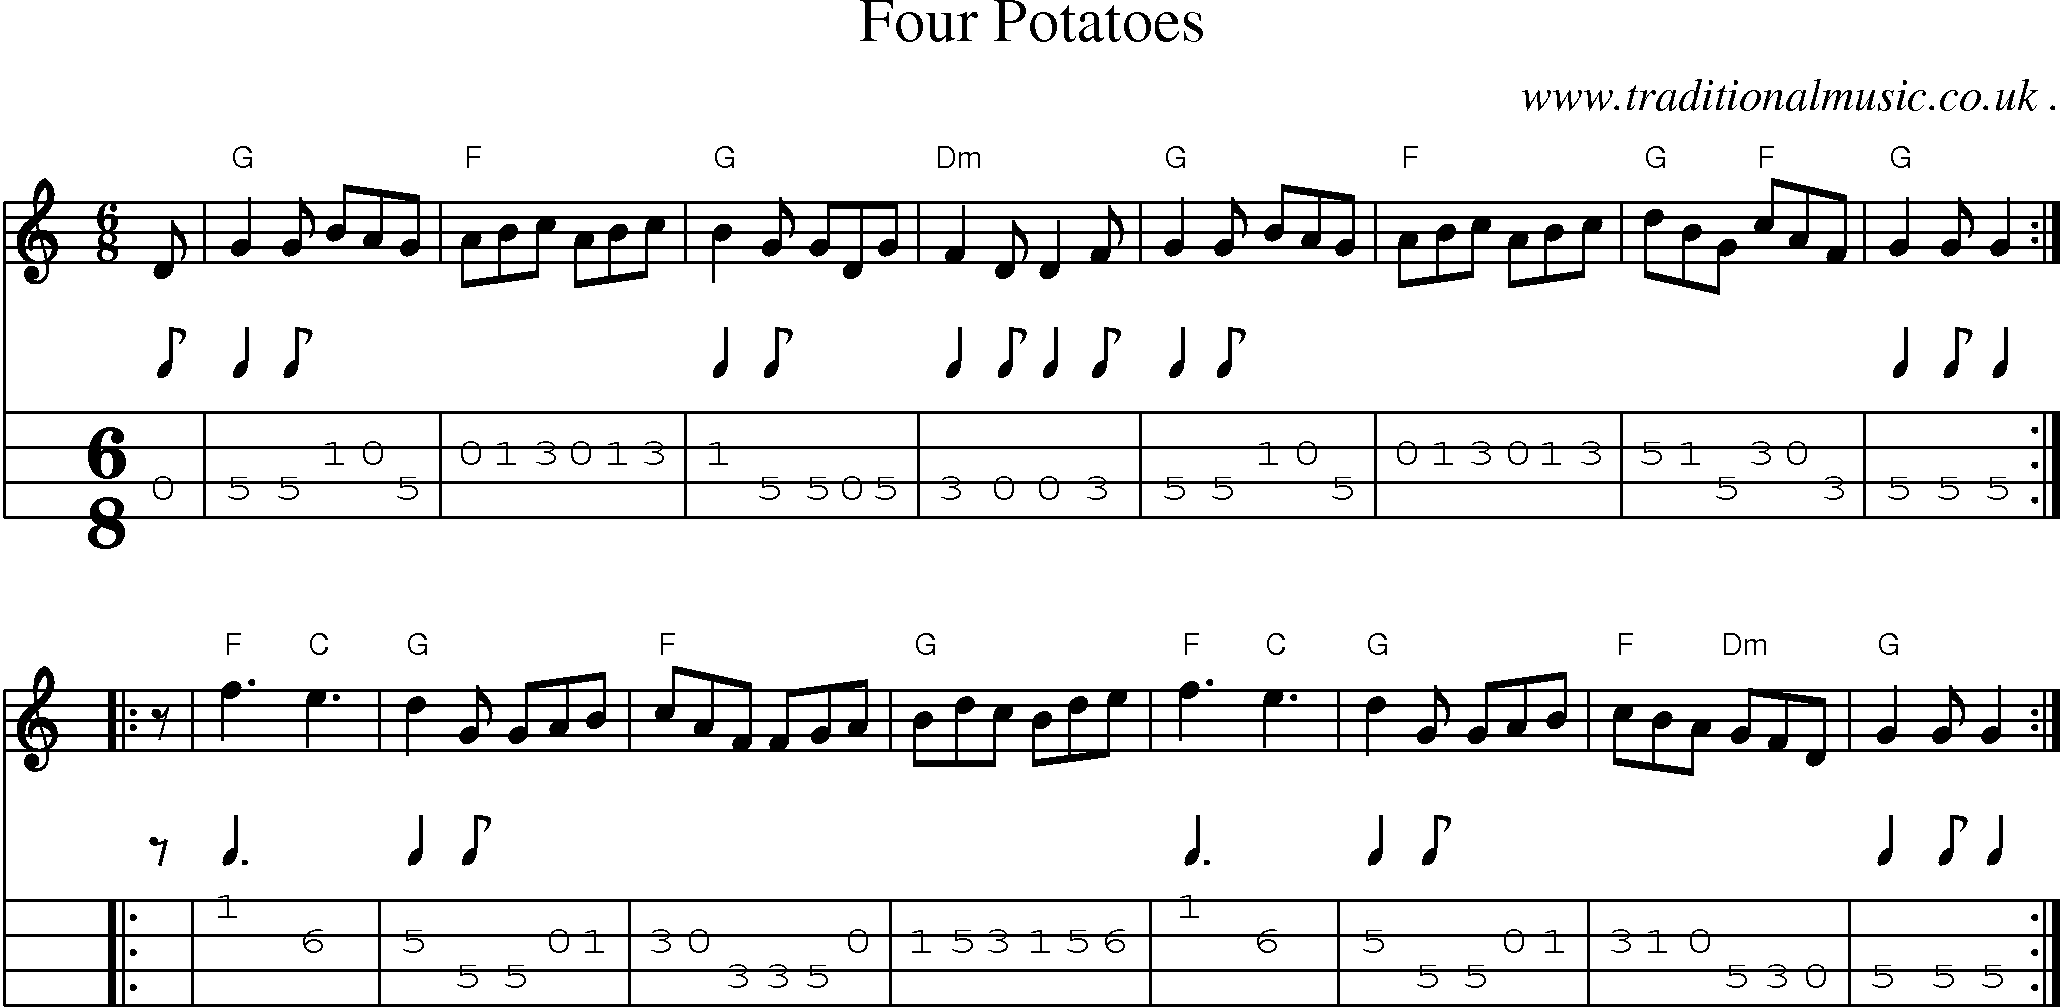 Sheet-music  score, Chords and Mandolin Tabs for Four Potatoes